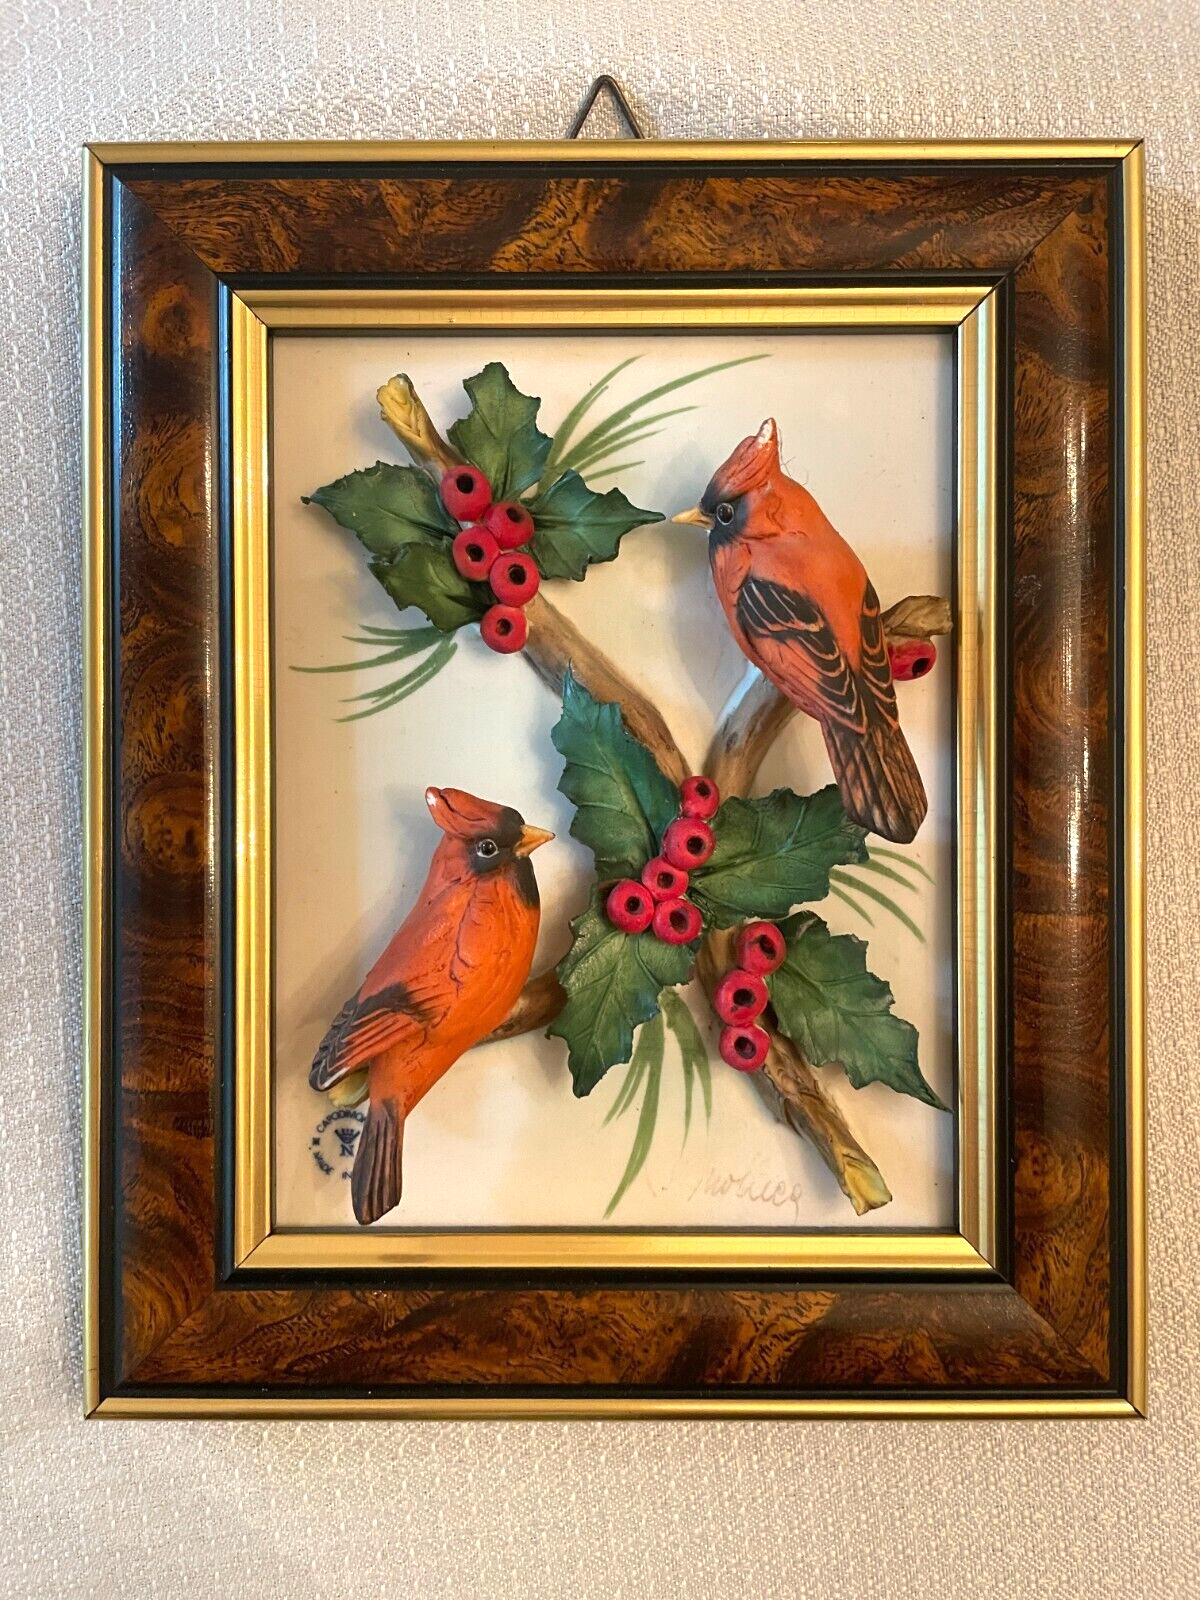 Vintage Framed CAPODIMONTE CARDINALS & HOLLY WALL PLAQUE ~ Signed ~Made in Italy